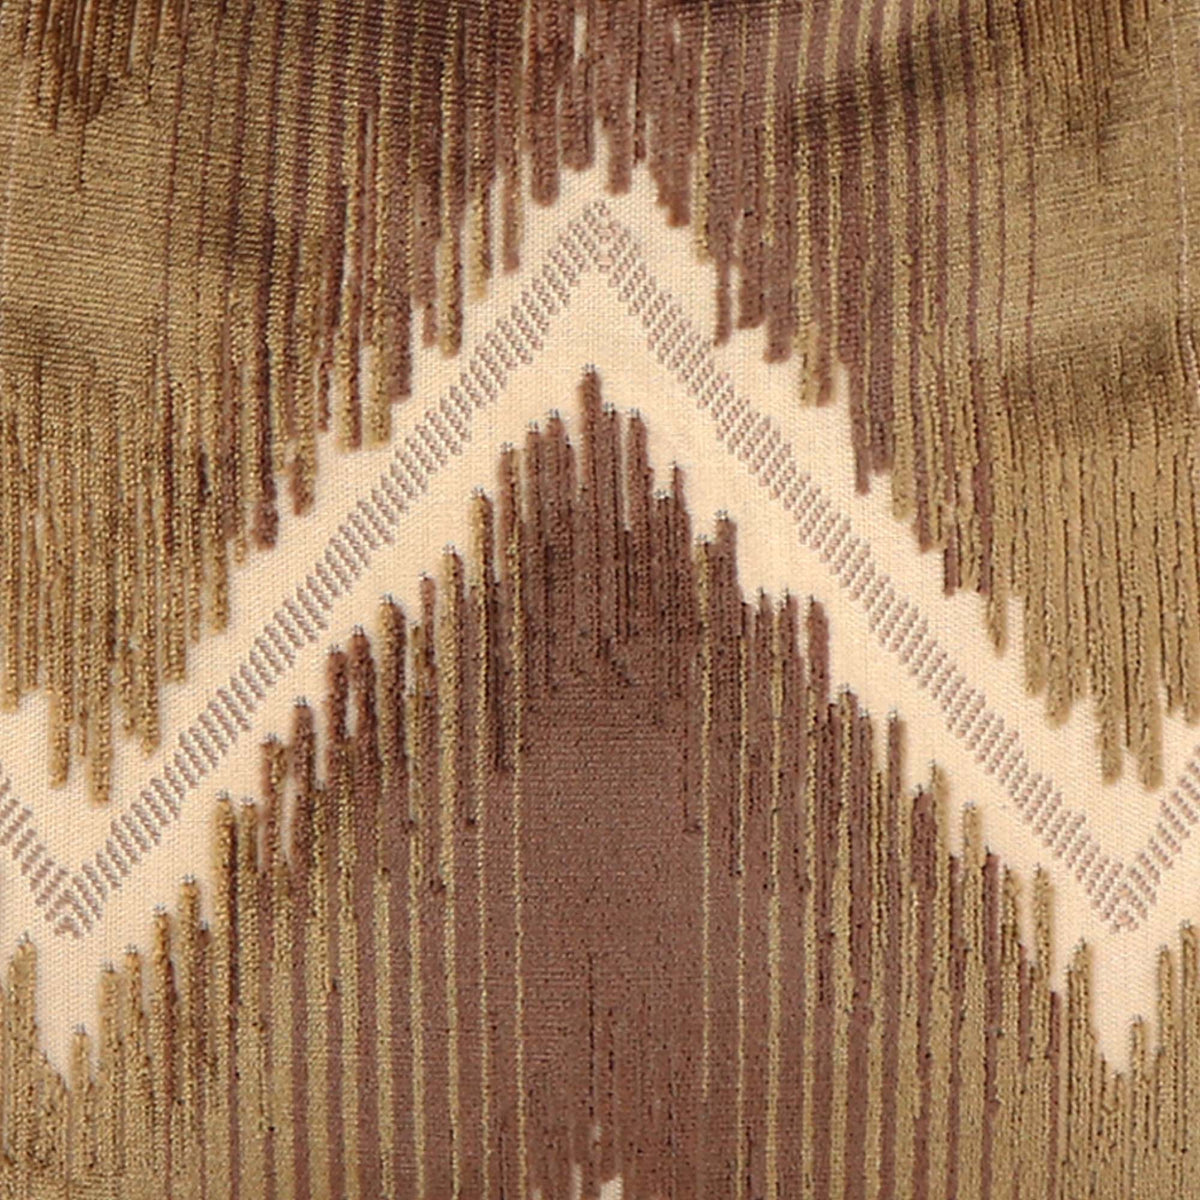 Shock Wave Velvet Sand and Sable / 4x4 inch Fabric Swatch